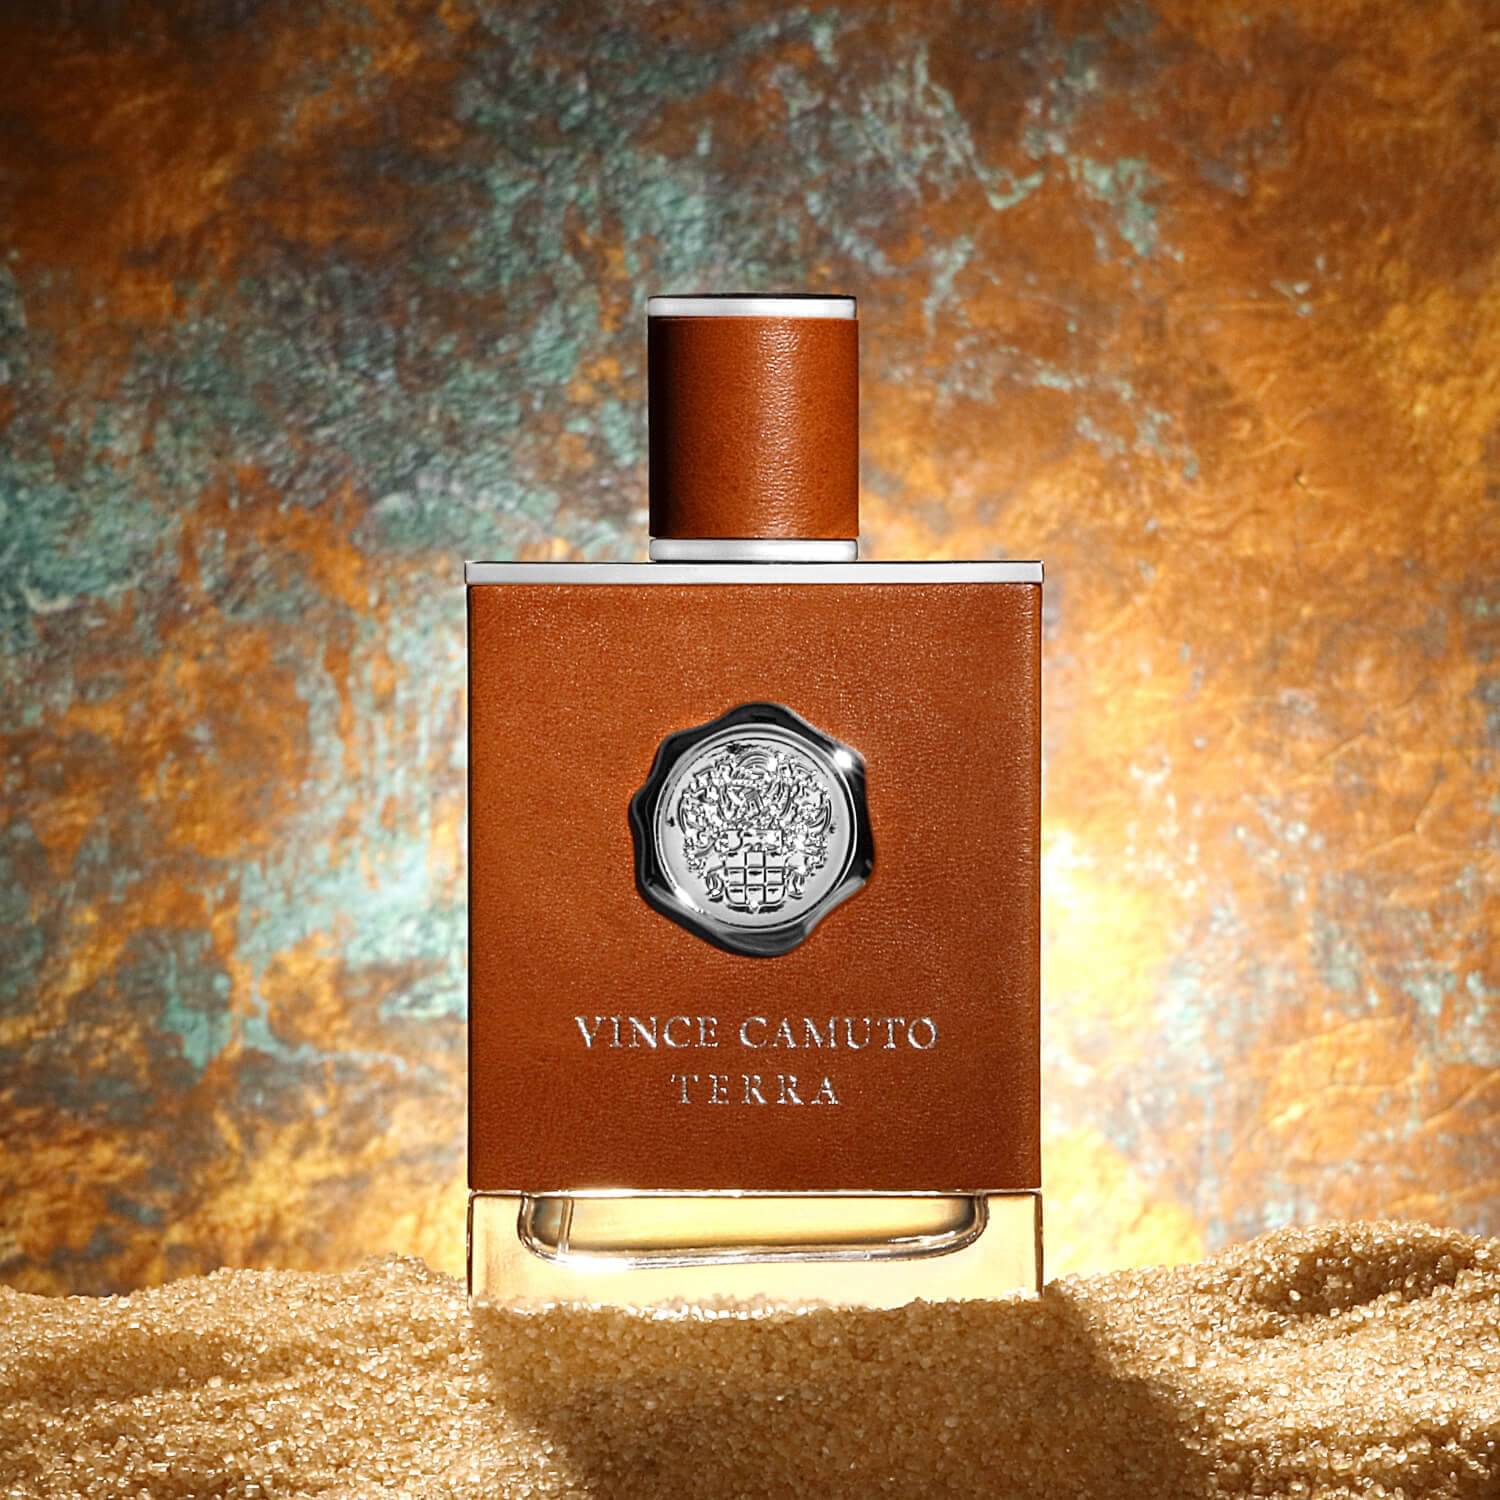 Score VINCE CAMUTO Homme Intenso at Scentbird for $16.95